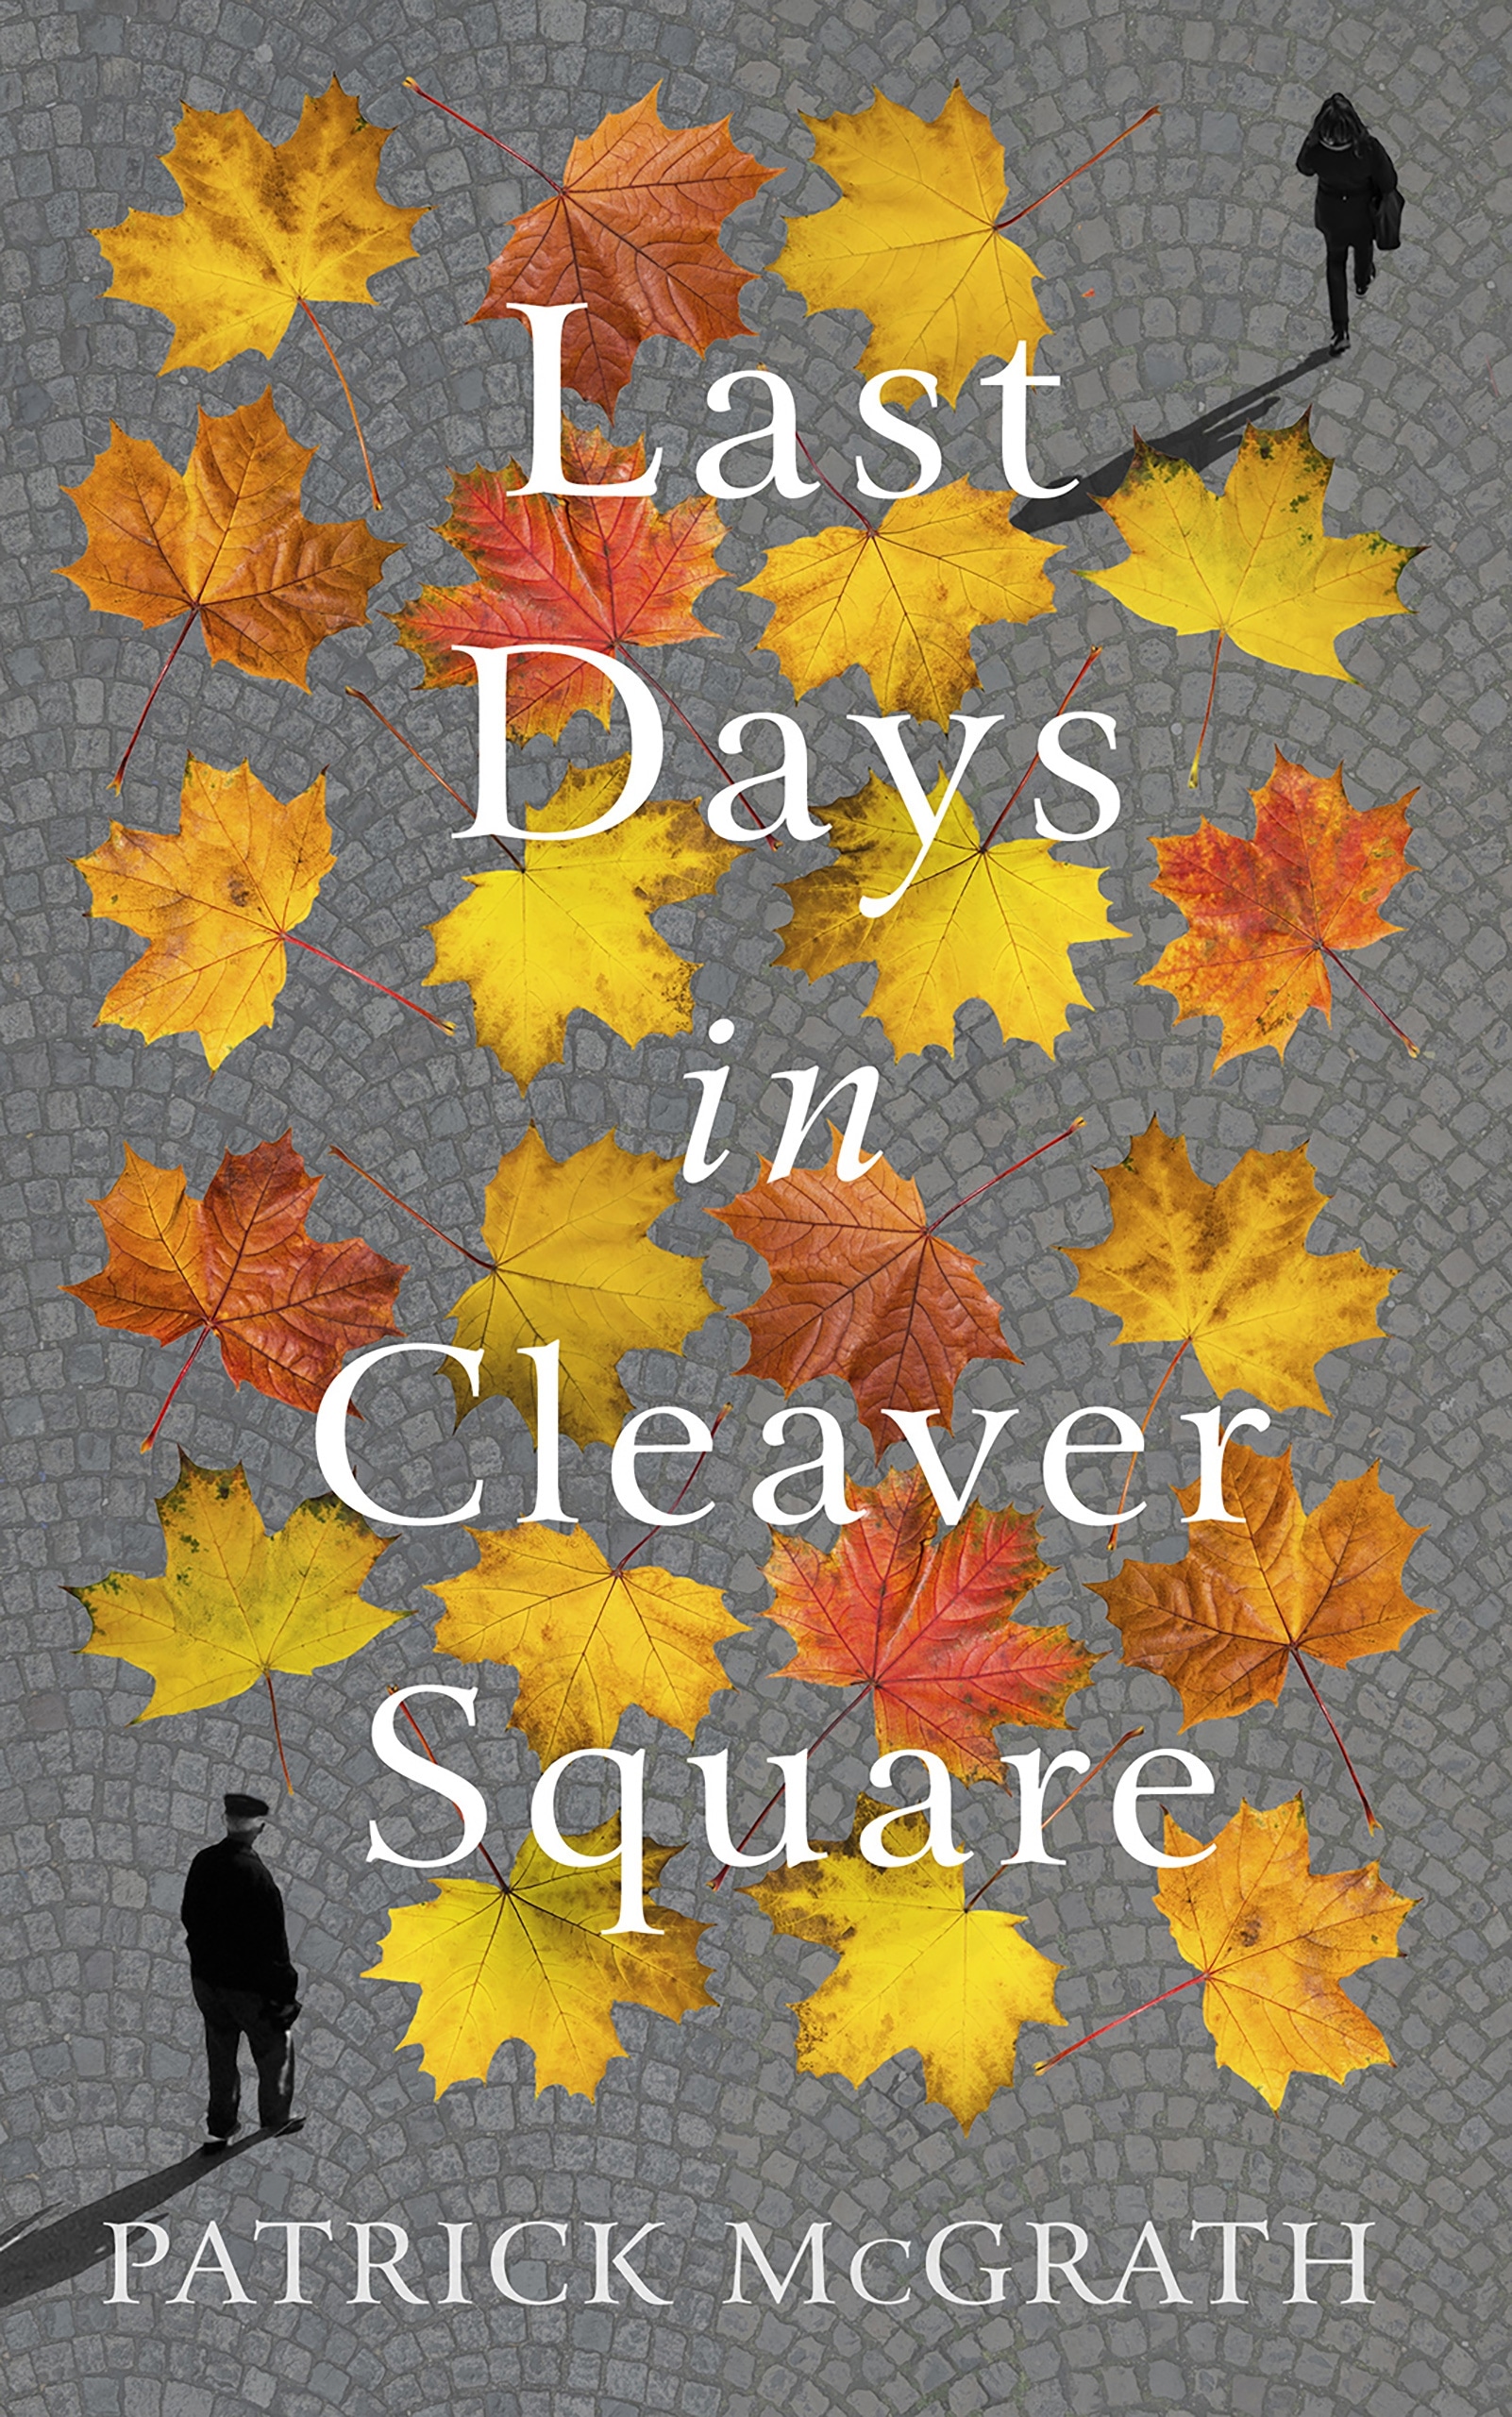 Book “Last Days in Cleaver Square” by Patrick McGrath — May 20, 2021